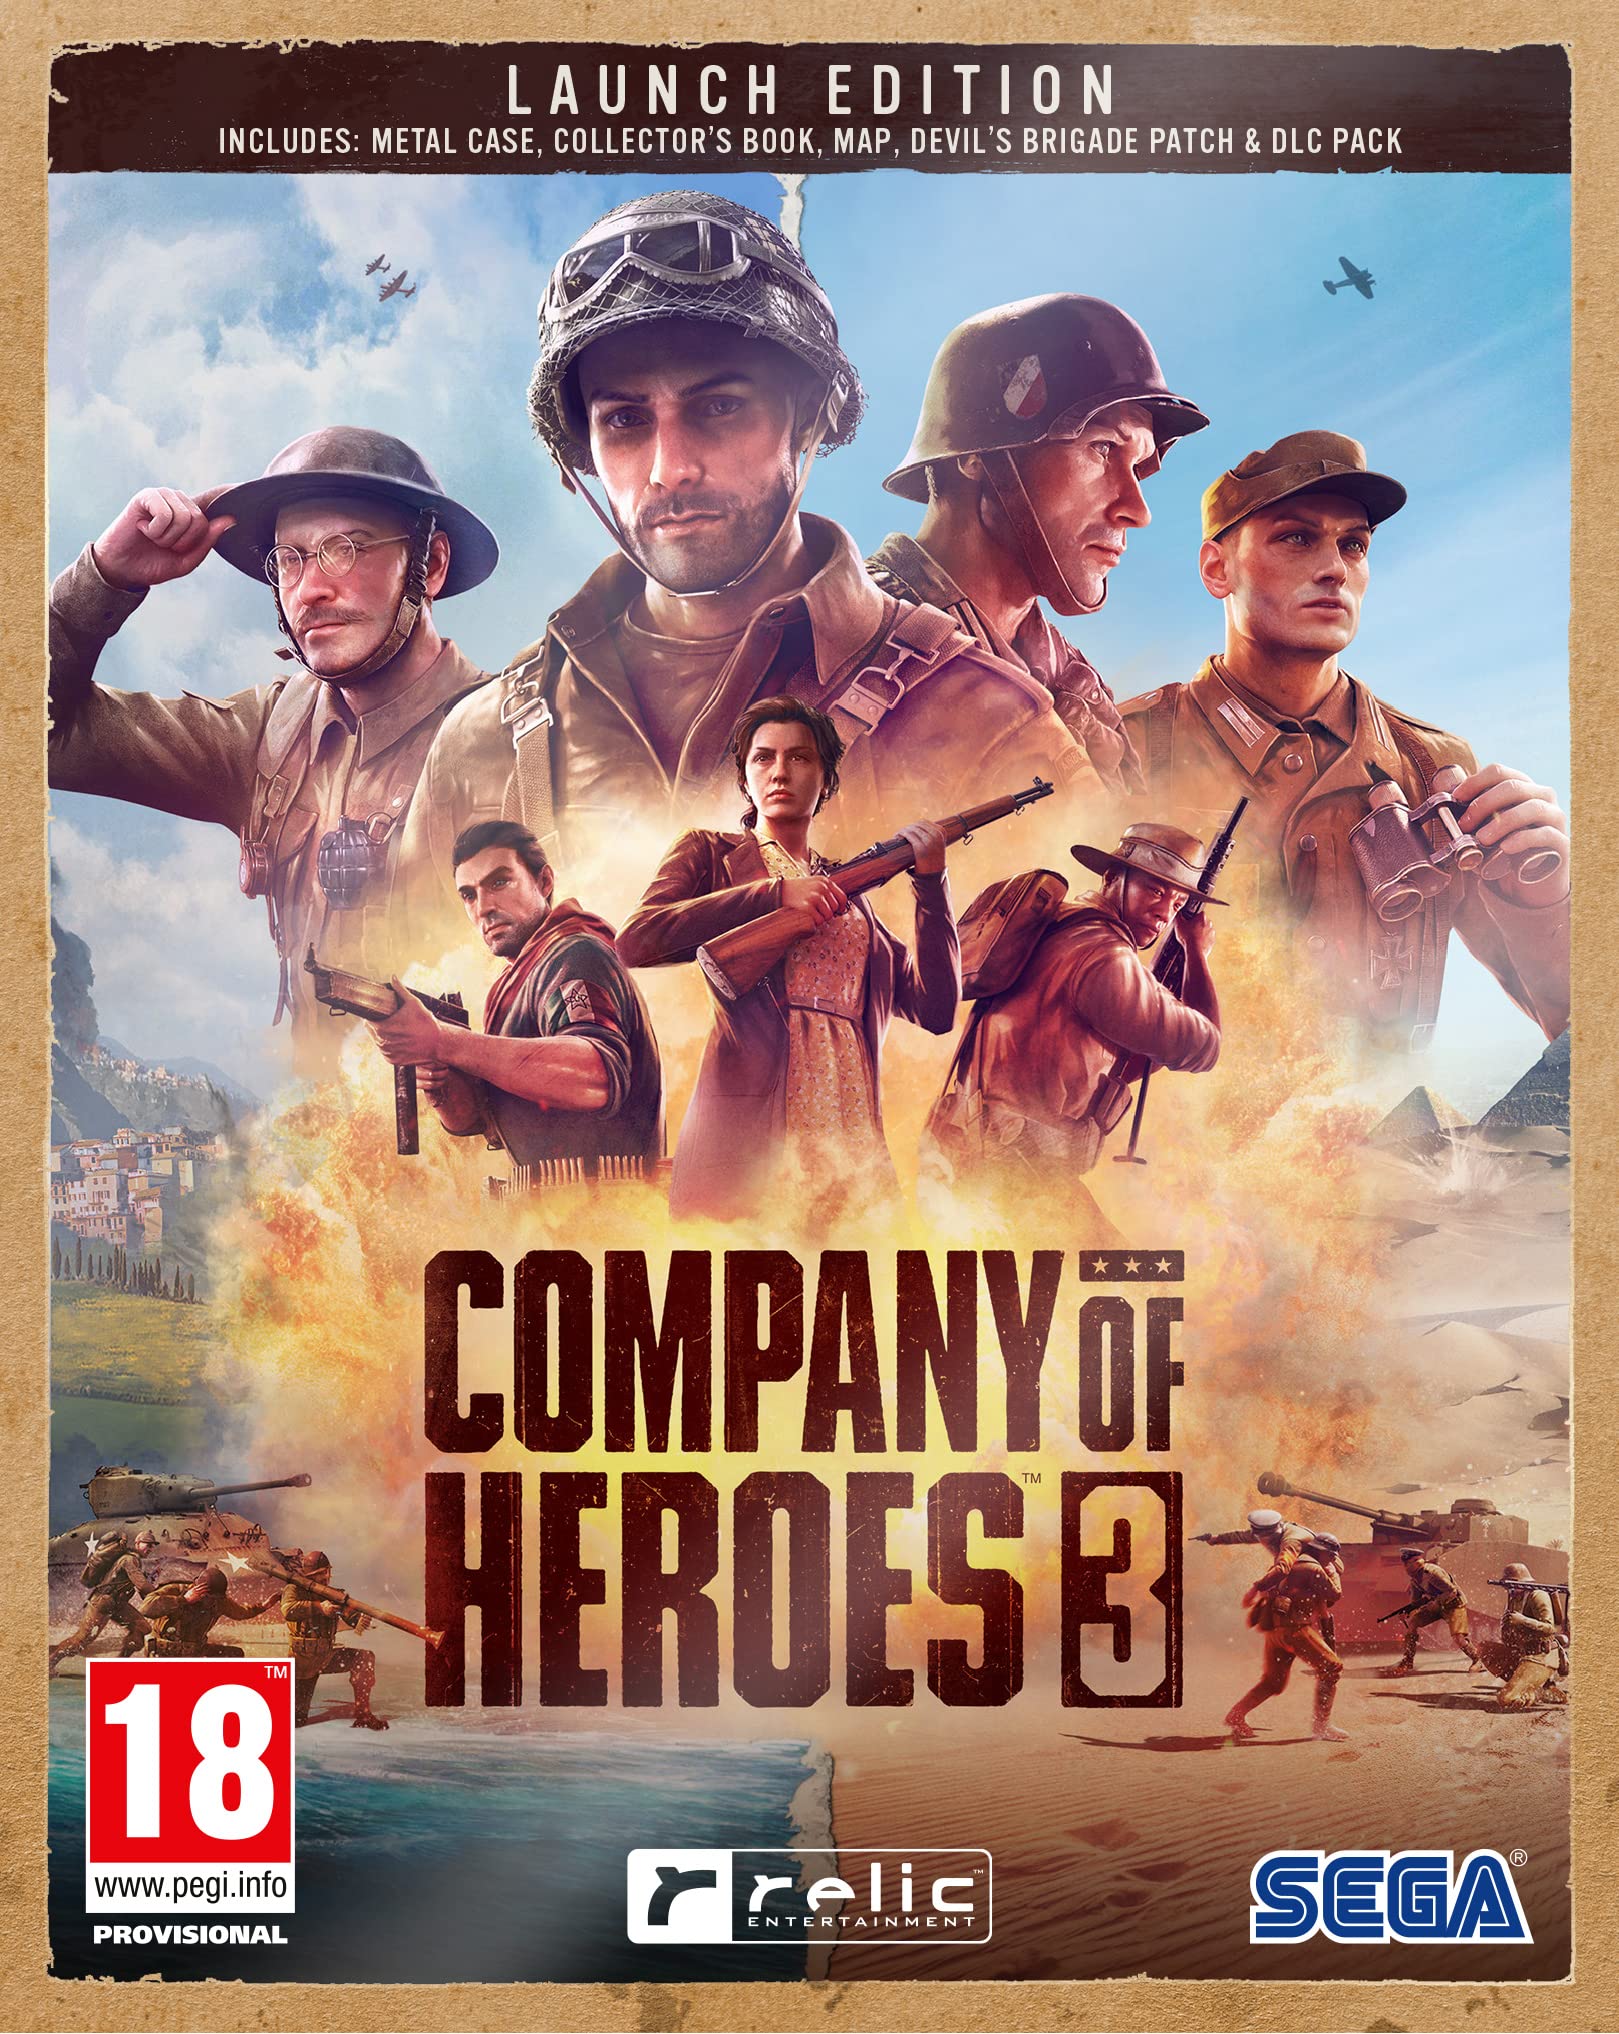 Company Of Heroes 3 Launch Edition With Metal Case